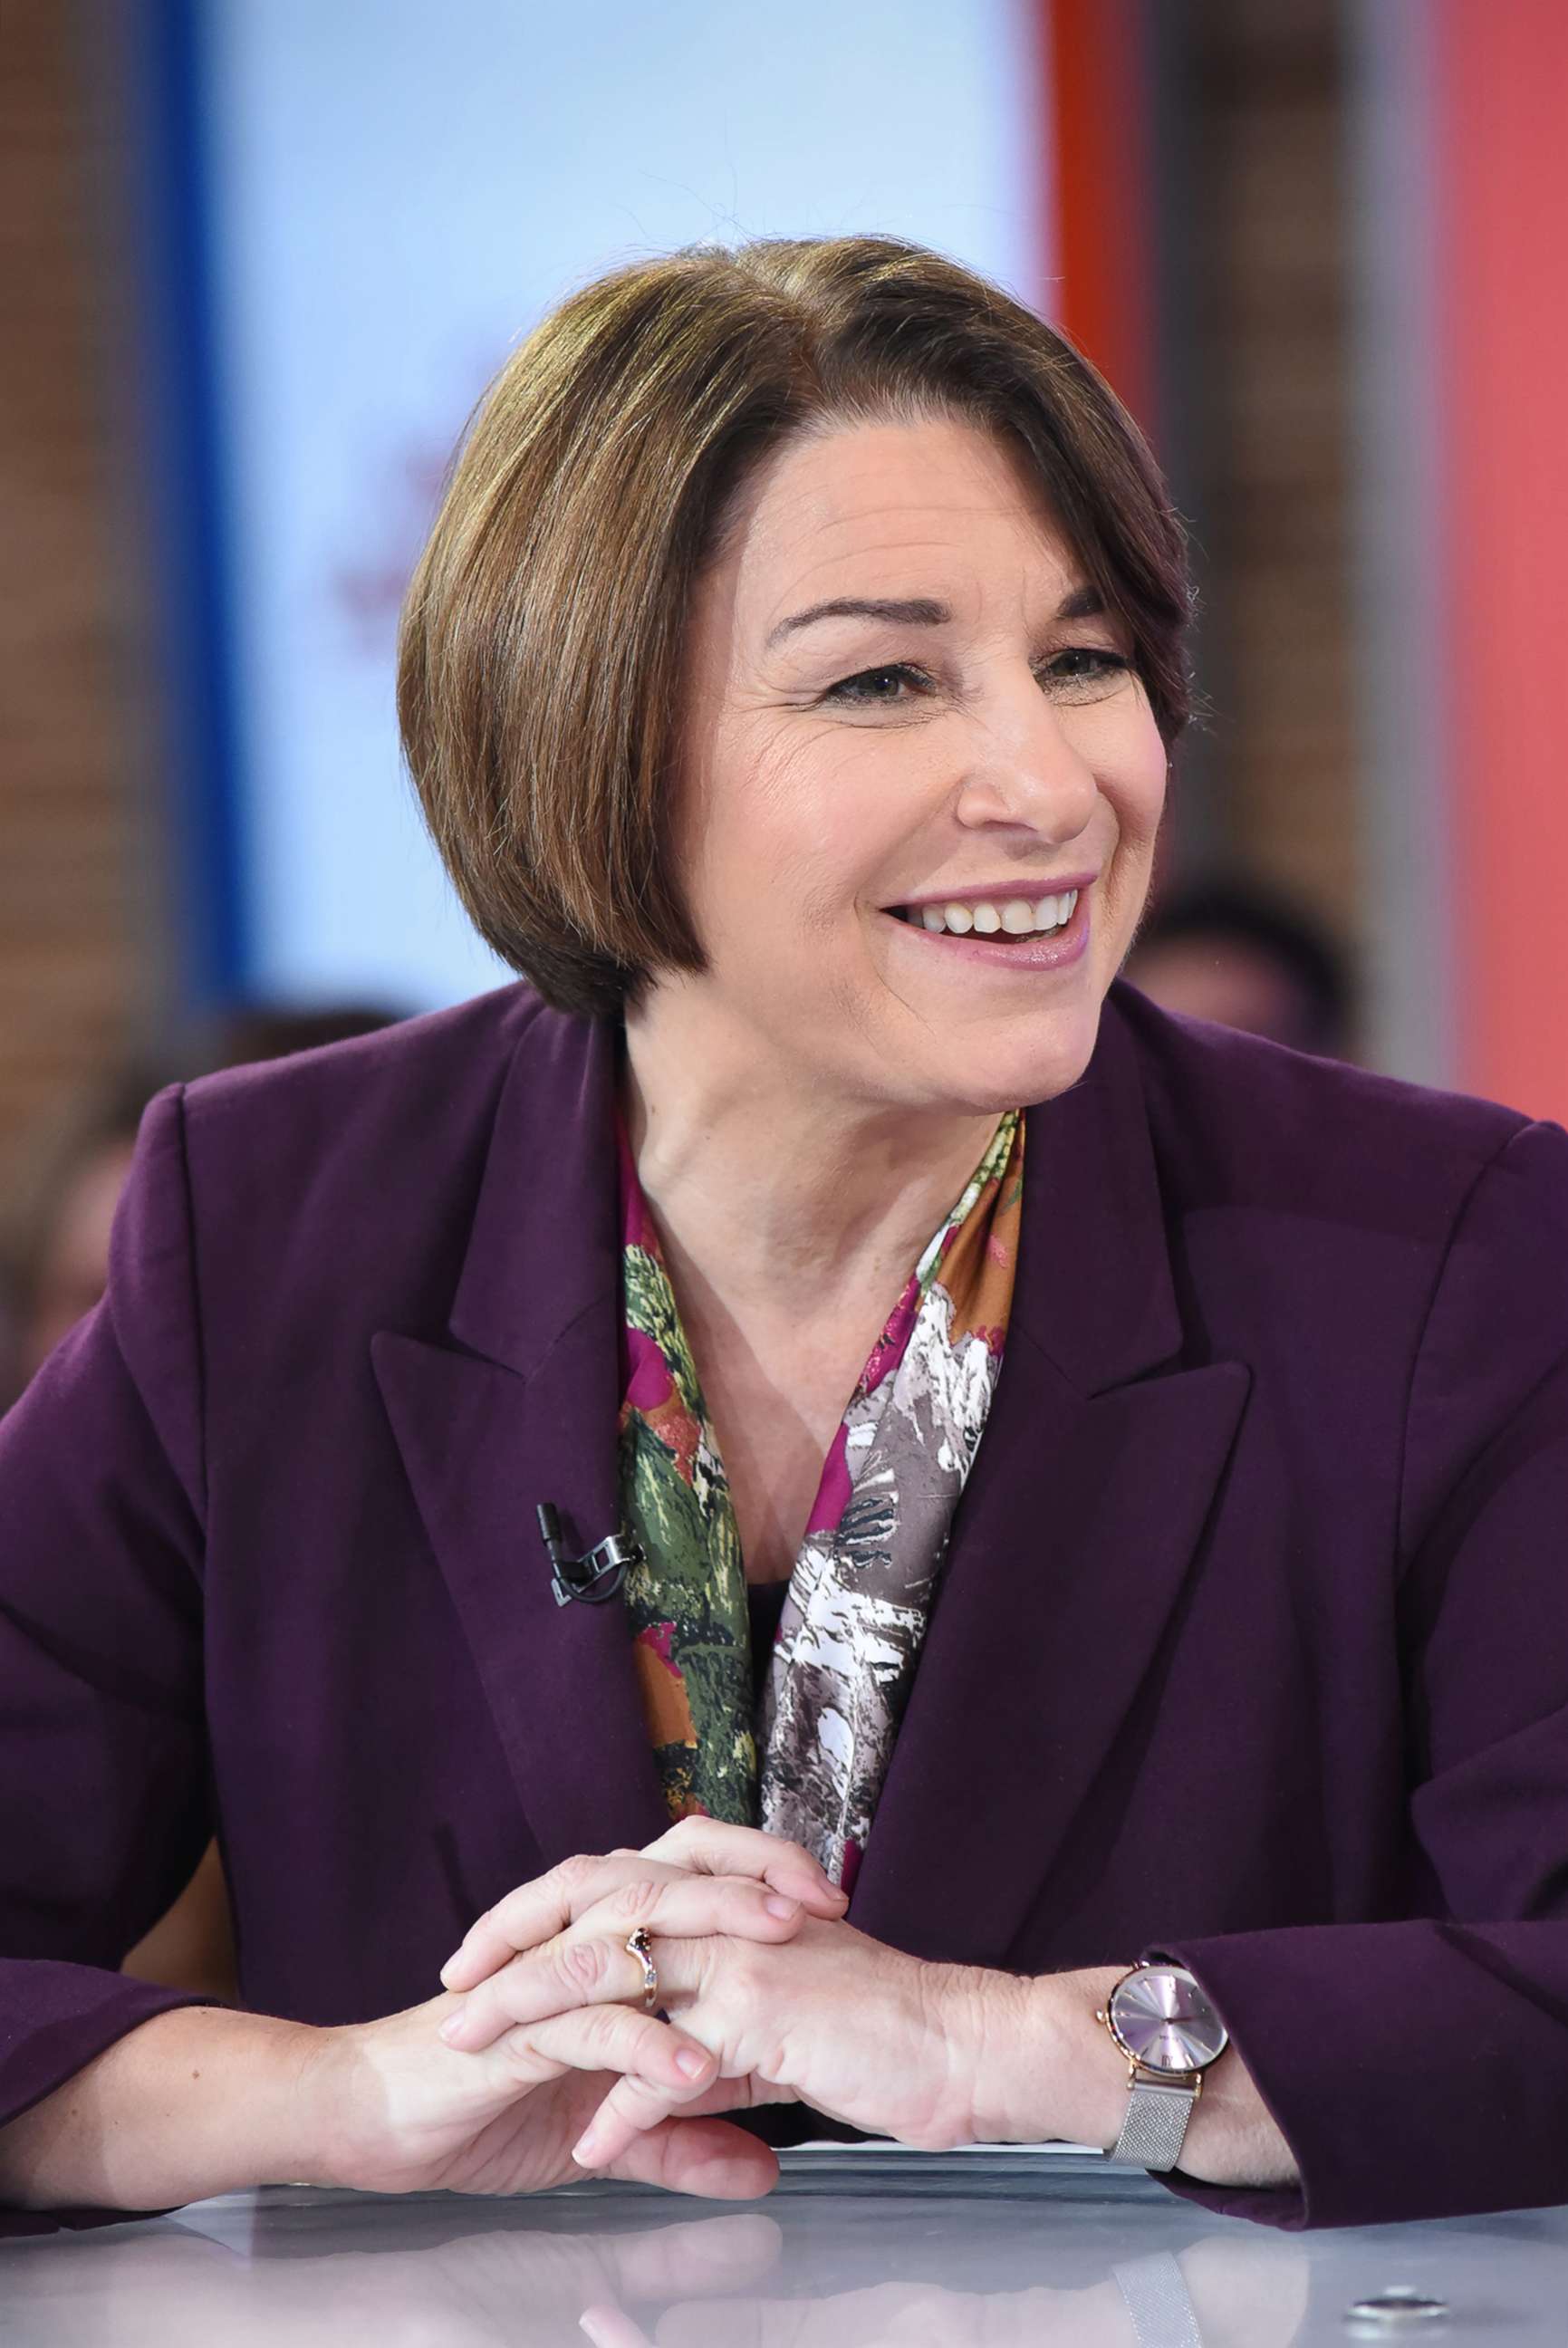 PHOTO: Sen. Amy Klobuchar appears on ABC's "Good Morning America," after announcing her candidacy for U.S. president, Feb. 11, 2019.